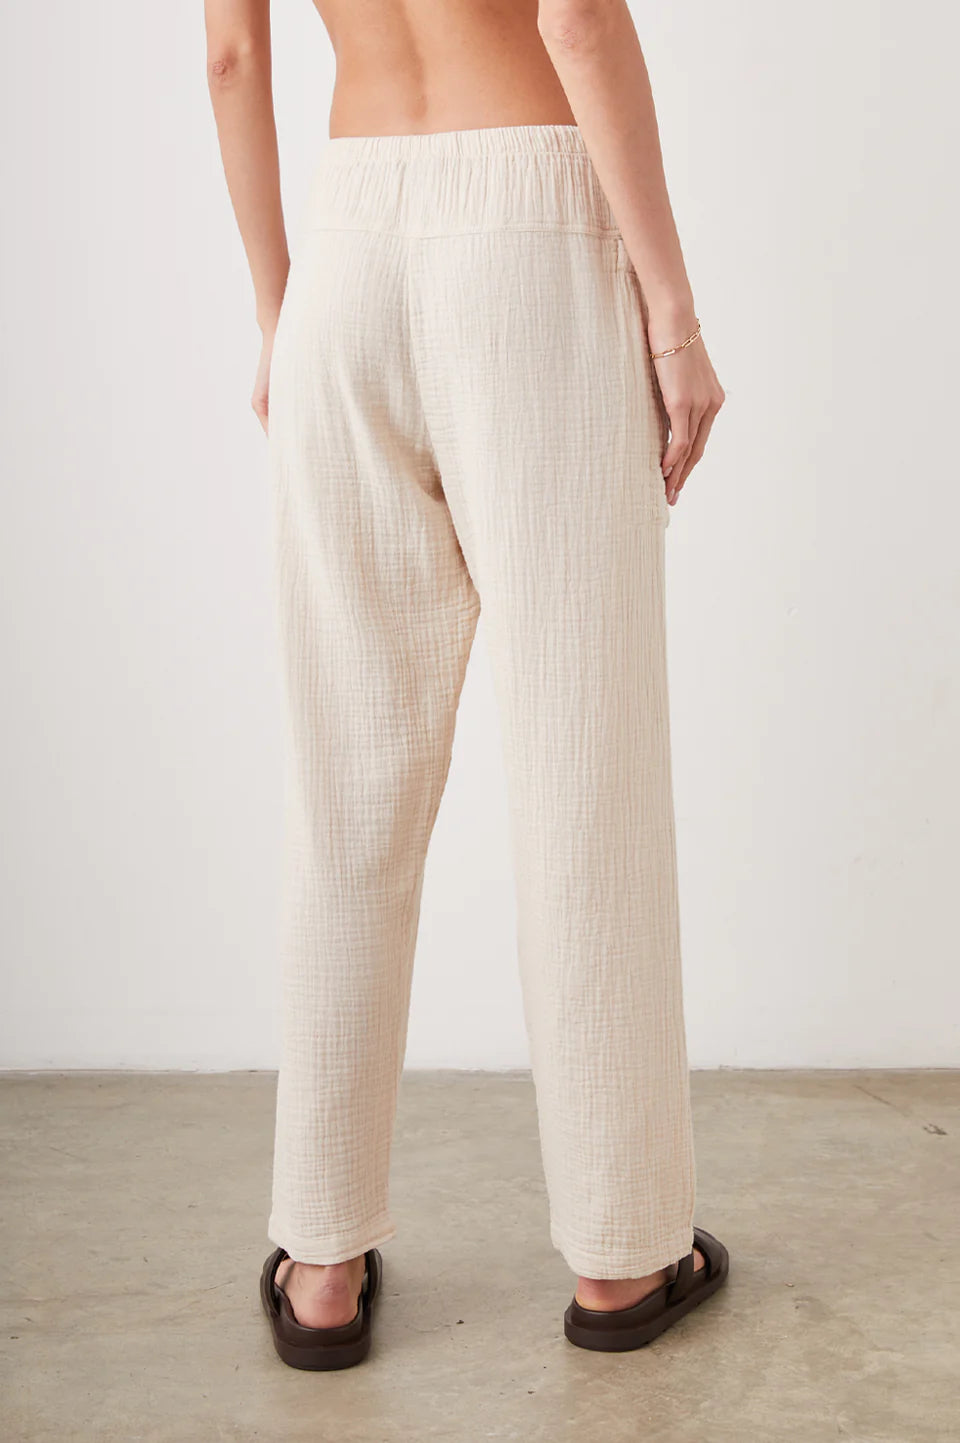 Darby Cotton Pants